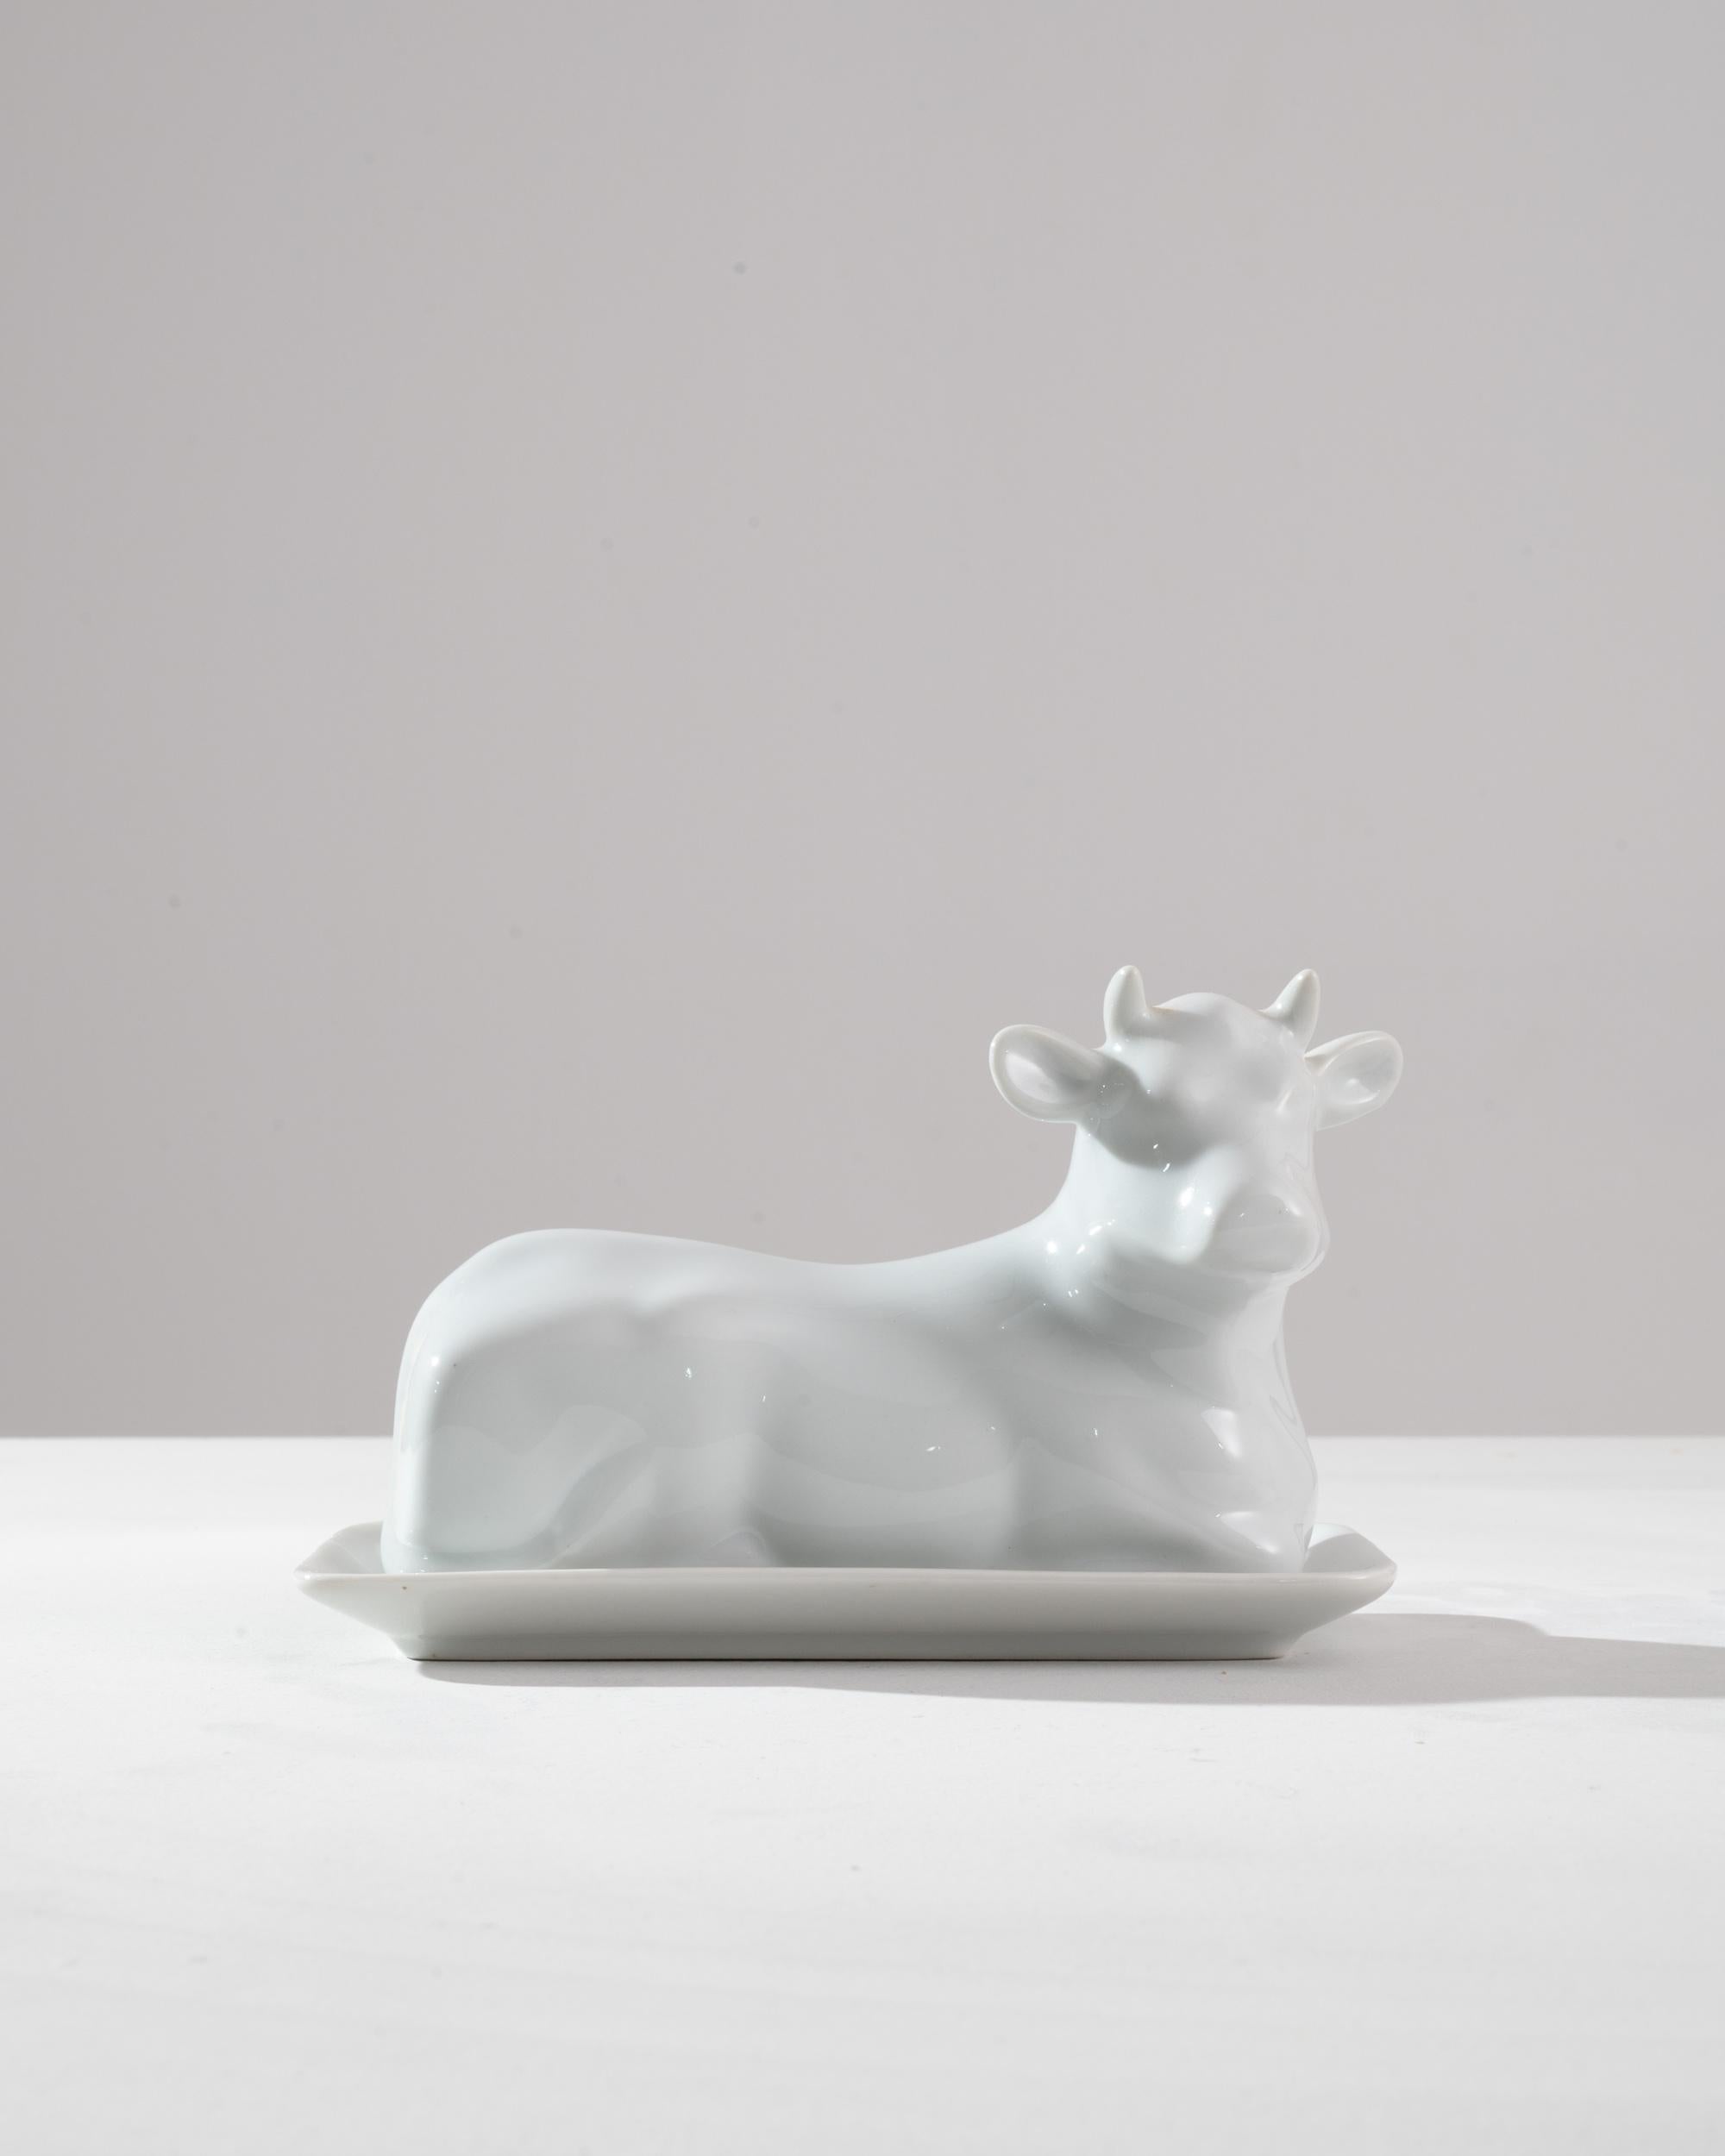 A vintage ceramic butter dish in the shape of a dairy cow. Made in France in the 20th century, this piece is a paean to the artistry of French butter-making. The cow rests in a peaceful, contented position; her little horns and wide ears are